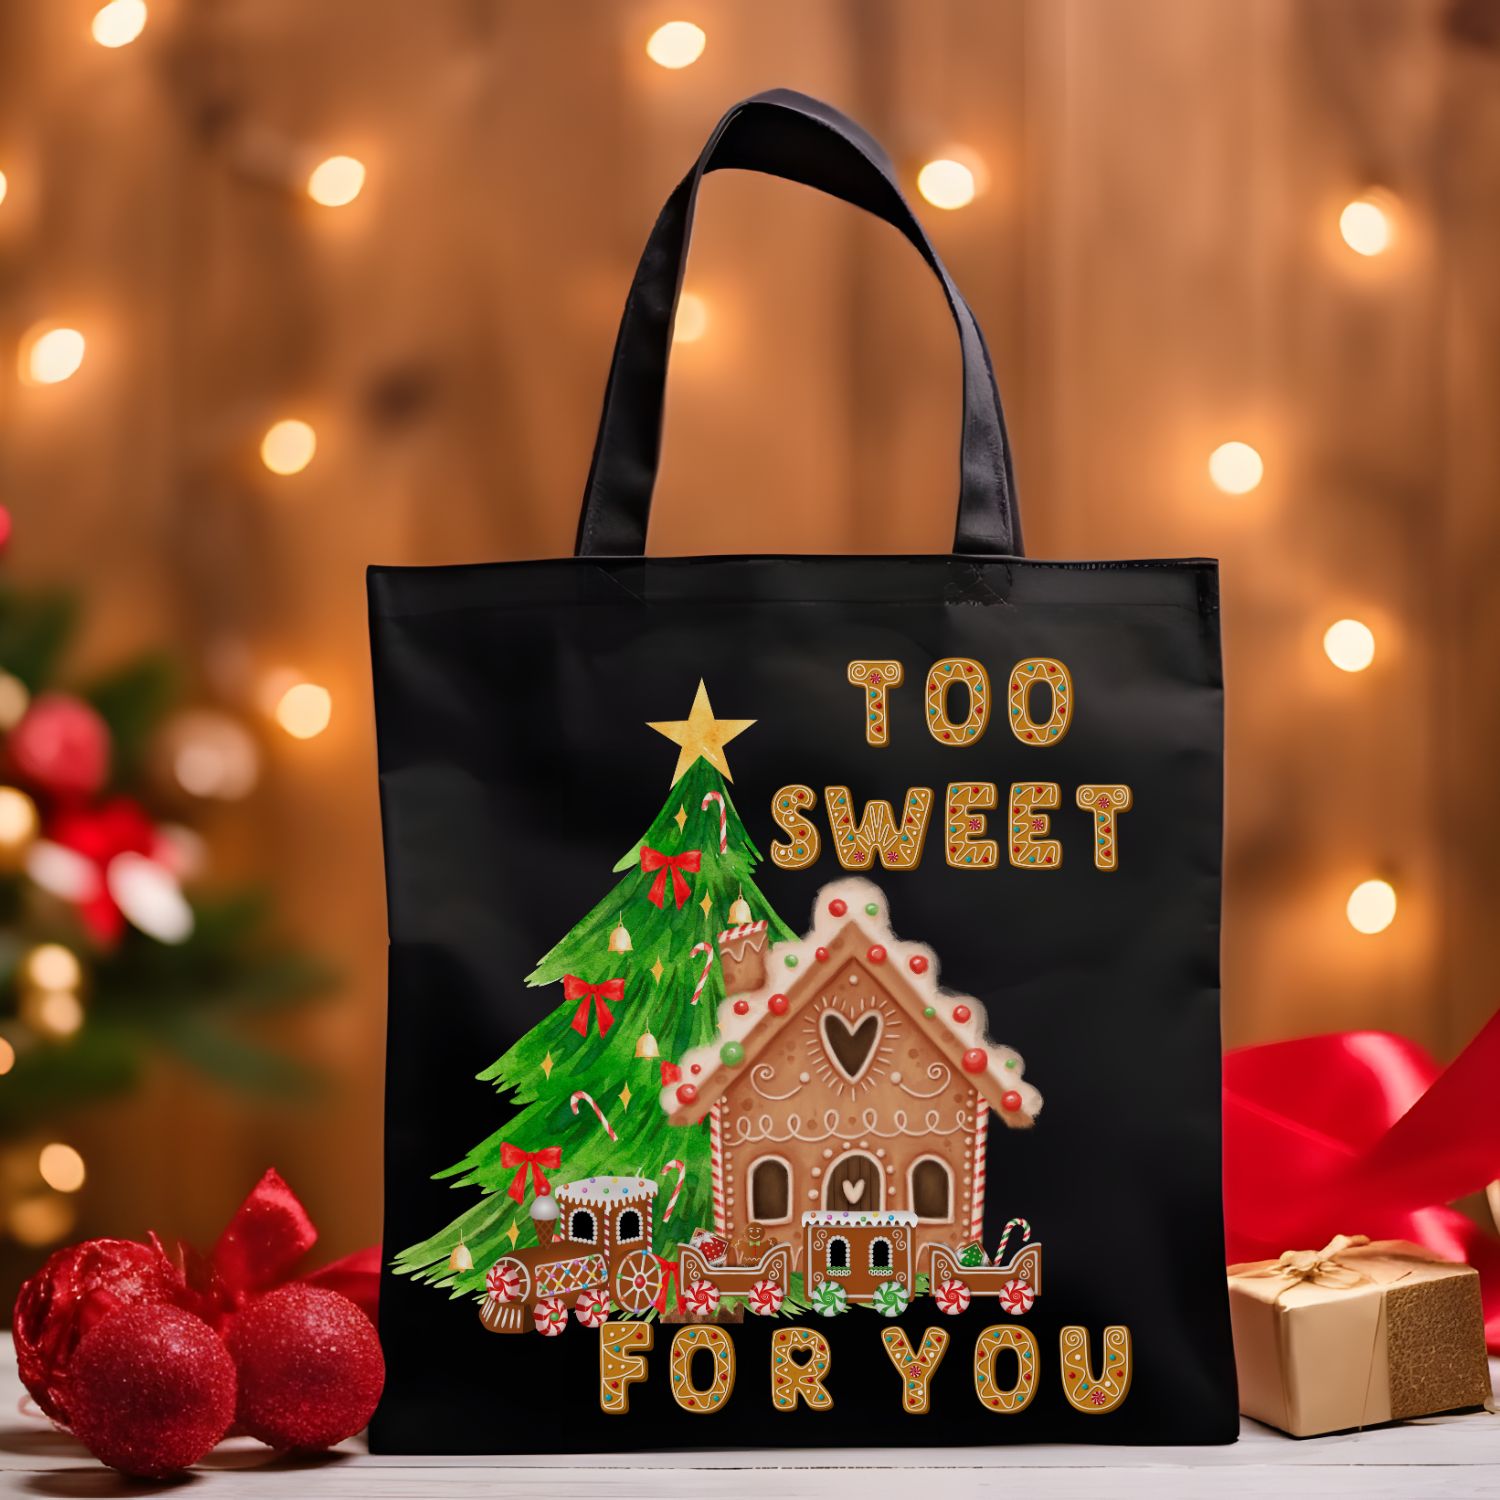 Christmas Tote Bag | Gingerbread House Cute Gift | Holiday Carryall for Festive Fashion Accessories   